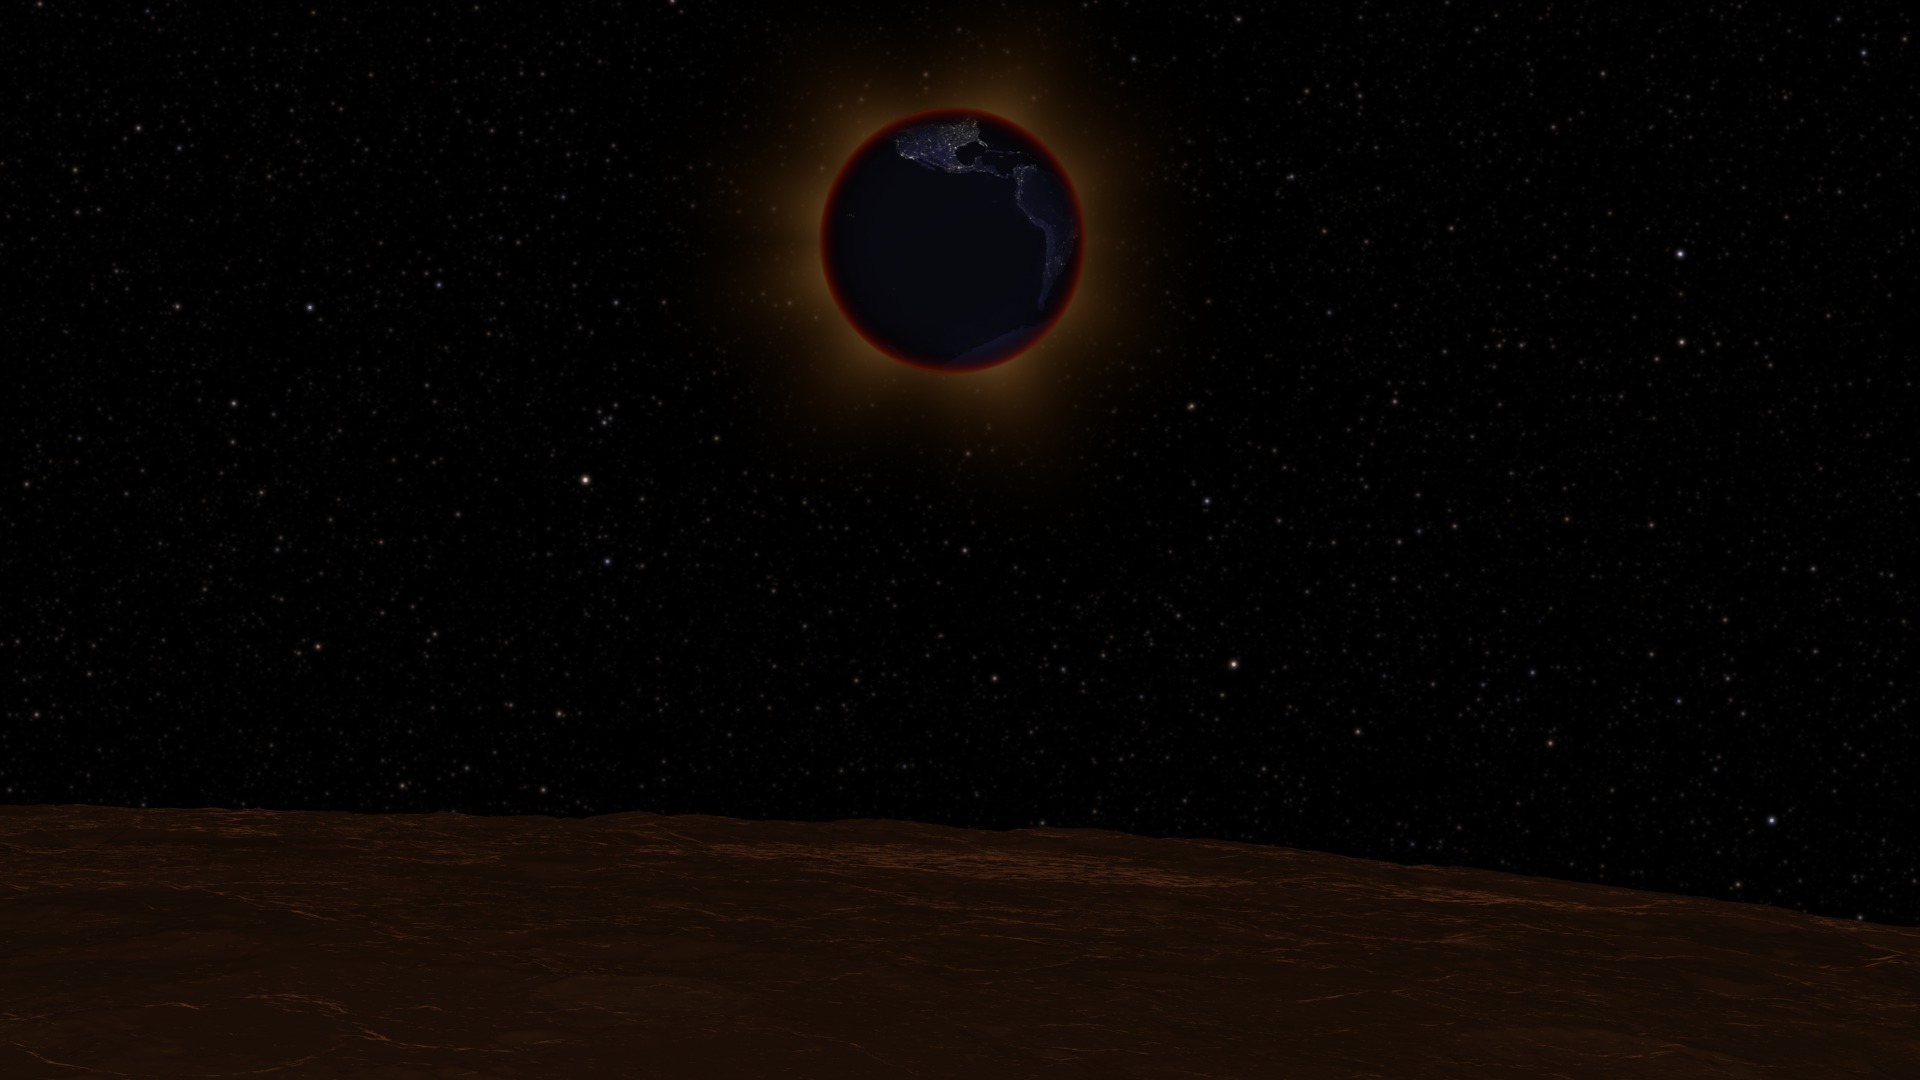 Preview Image for Lunar Eclipse of April 15, 2014 As Viewed from the Moon